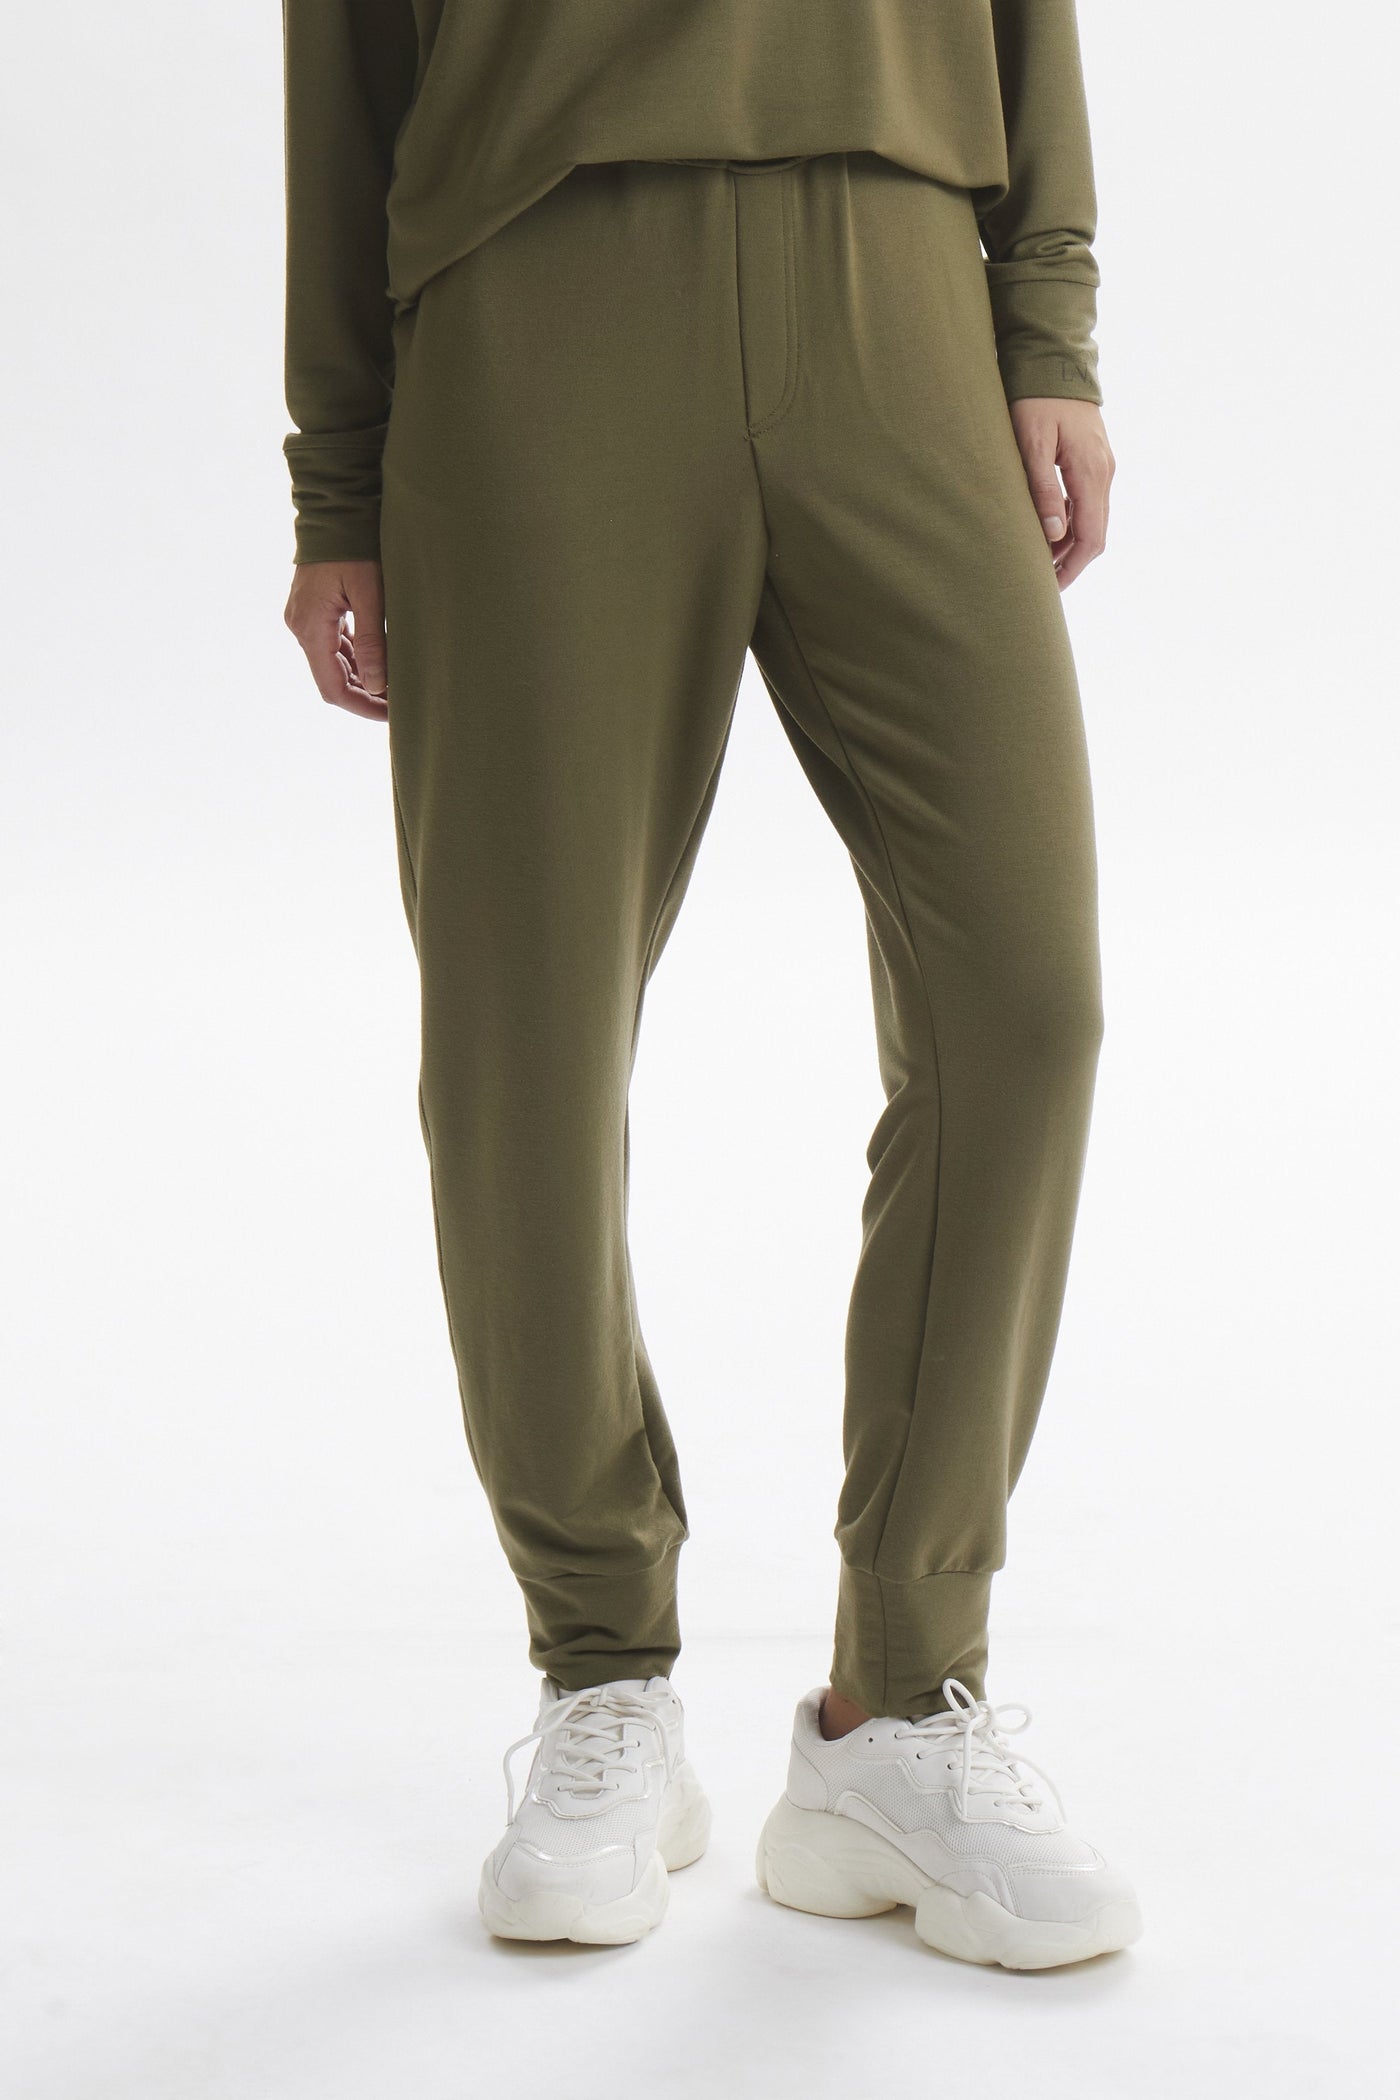 LNKira Pants-Womens-Ohh! By Gum - Shop Sustainable